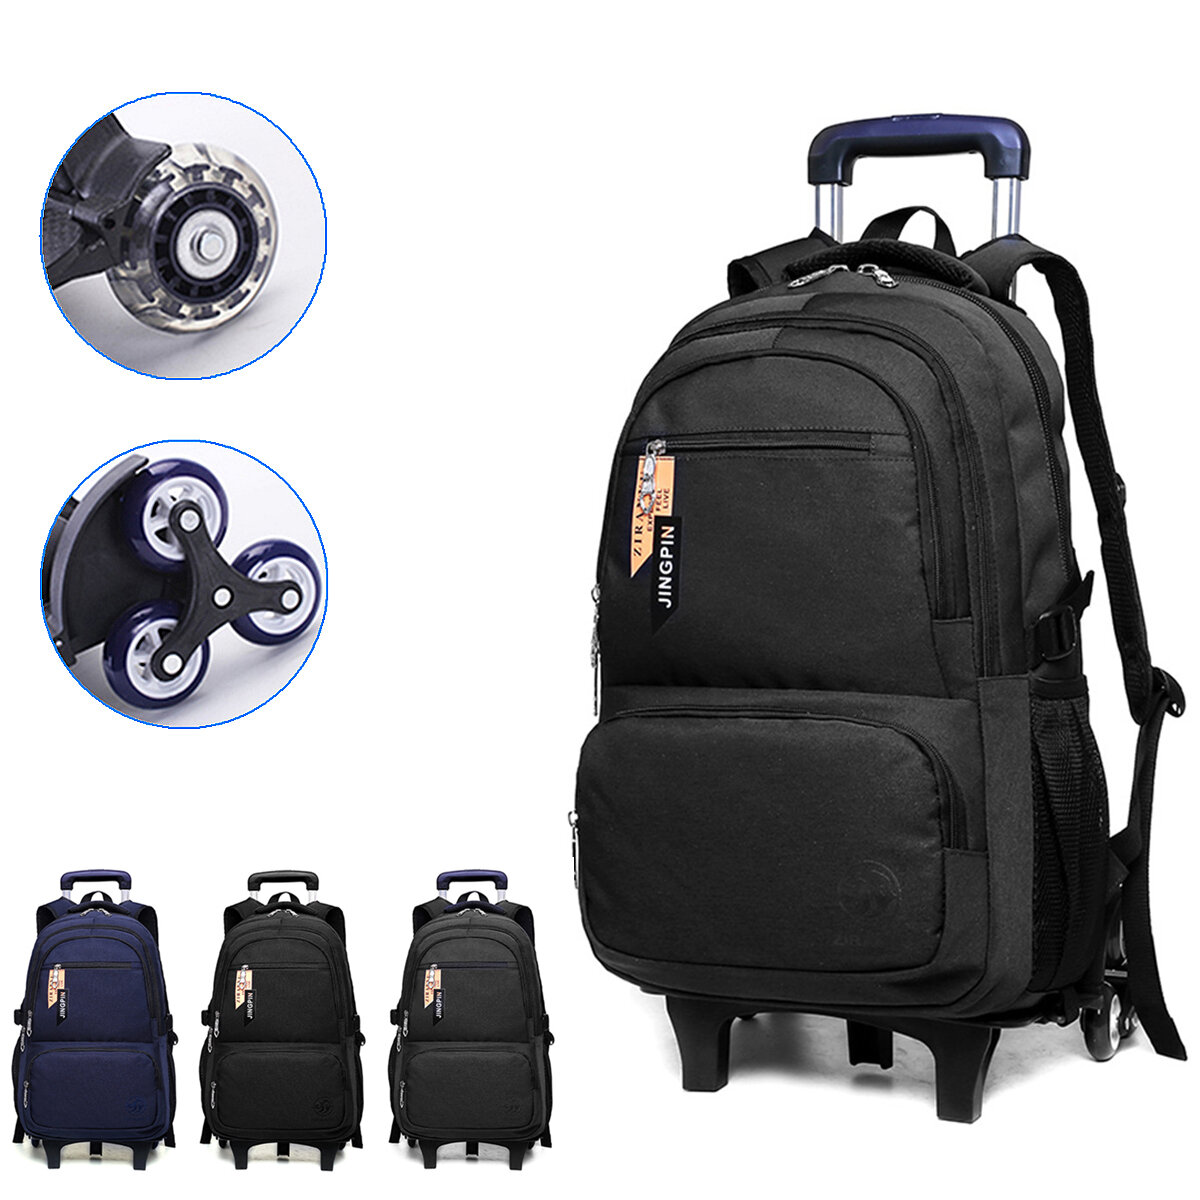 ZIRANYU 2/6 Wheels Solid Color Kids Travel Trolley Backpack Rolling Luggage Backpack School Wheeled Bag for Children